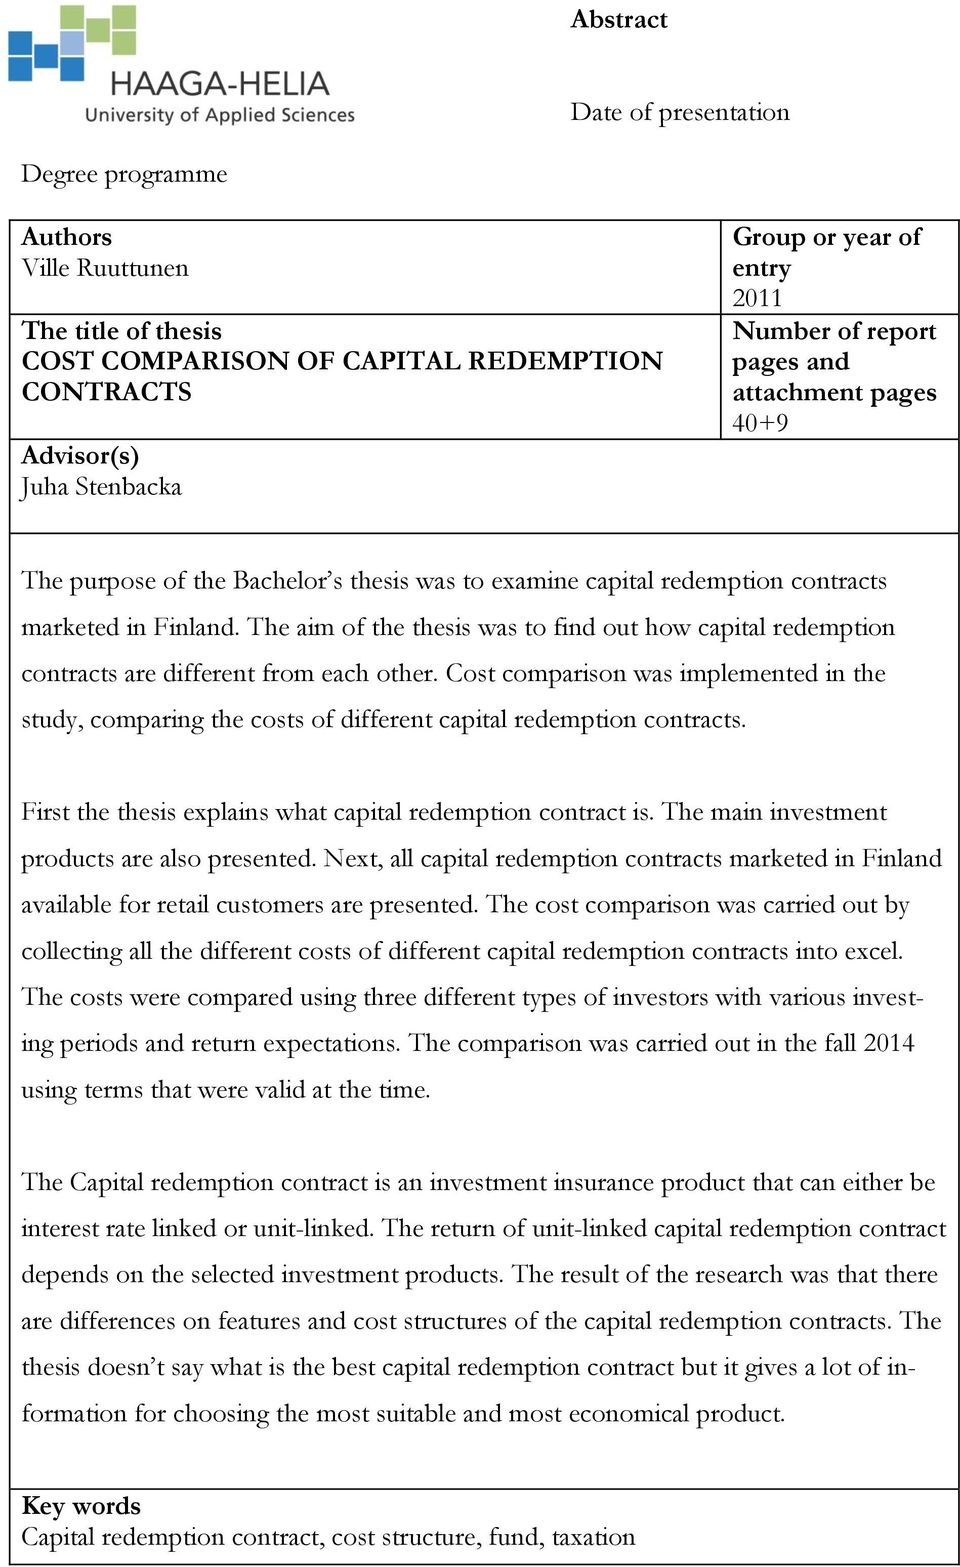 The aim of the thesis was to find out how capital redemption contracts are different from each other.